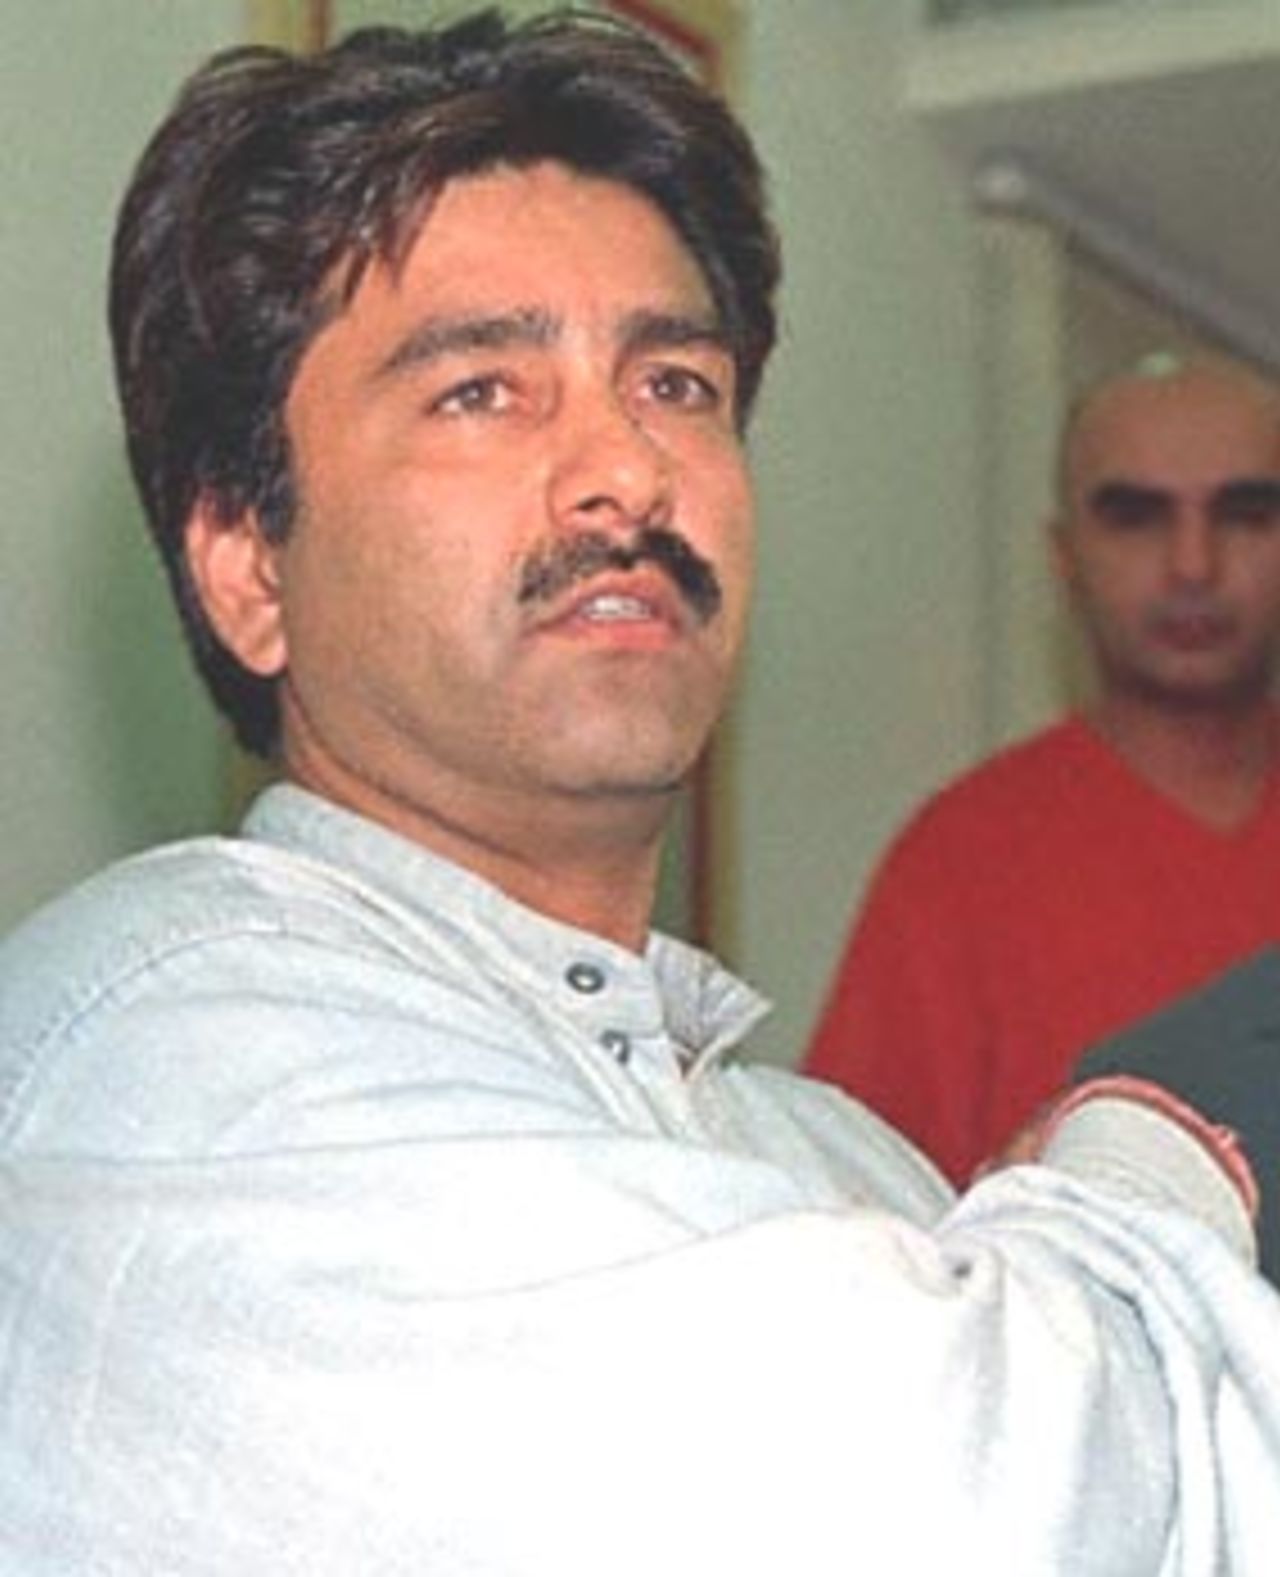 Former Indian cricket player Manoj Prabhkar gestures while talking to reporters during a press conference in New Delhi May 24, 2000, where he named former Indian team-mate and current national coach Kapil Dev as the man who offered him bribe to play badly in a one-day international in 1994. This is the first time Prabhakar has openly accused Kapil Dev of offering bribe after years of reluctance to name the player, leading to speculation in the media and among cricket lovers.